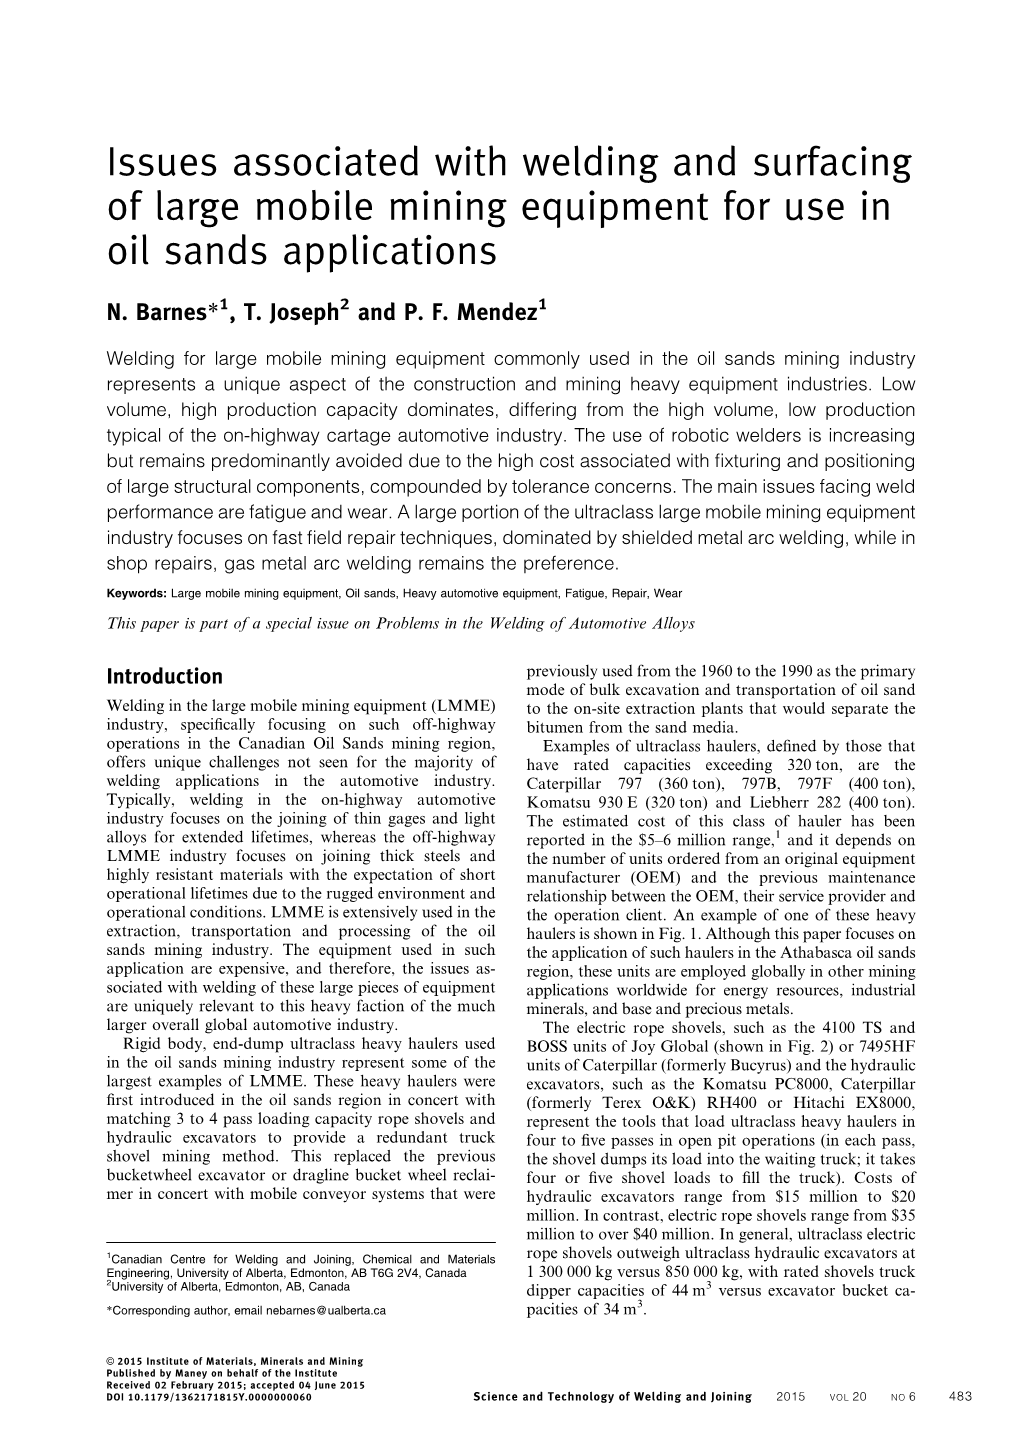 Issues Associated with Welding and Surfacing of Large Mobile Mining Equipment for Use in Oil Sands Applications